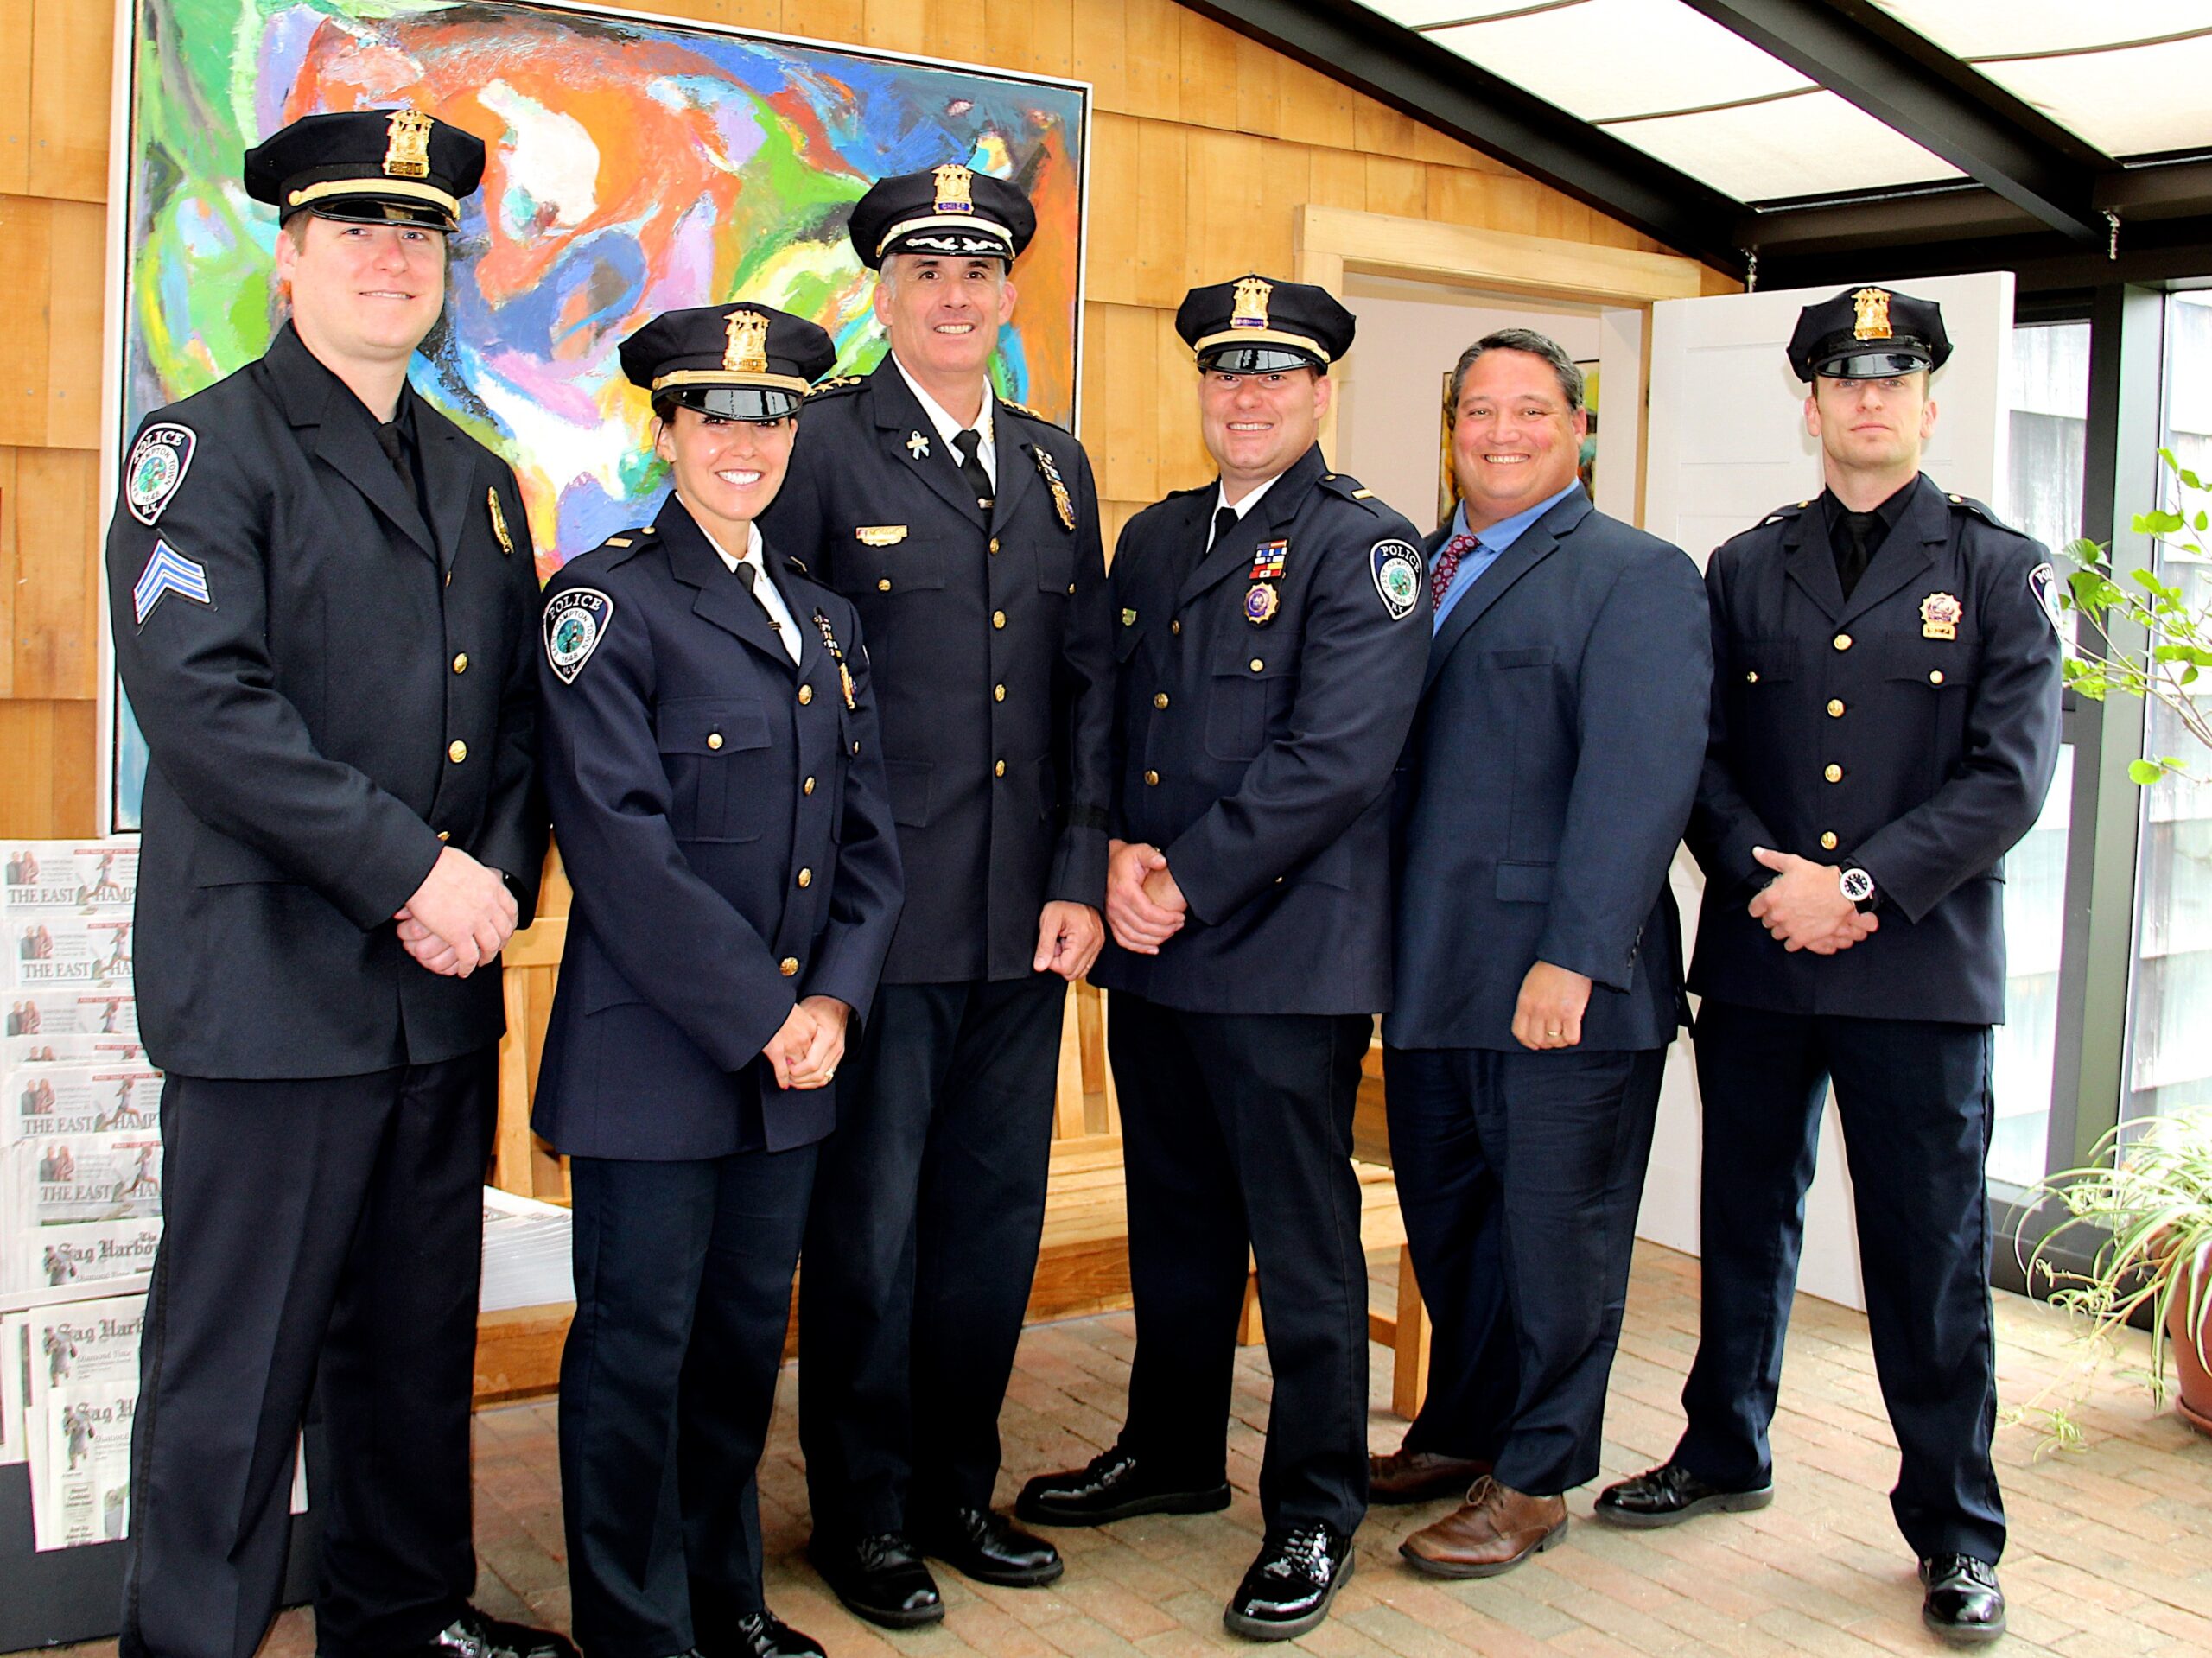 The East Hampton Town Police Department swore in several newly promoted officers on Tuesday. Pictured from left are Sergeant Ryan Fink, Lieutenant Chelsea Tierney, Chief Michael Sarlo, Lieutenant Daniel Toia, Detective Sergeant Ryan Hogan and Detective Luke McNamara.